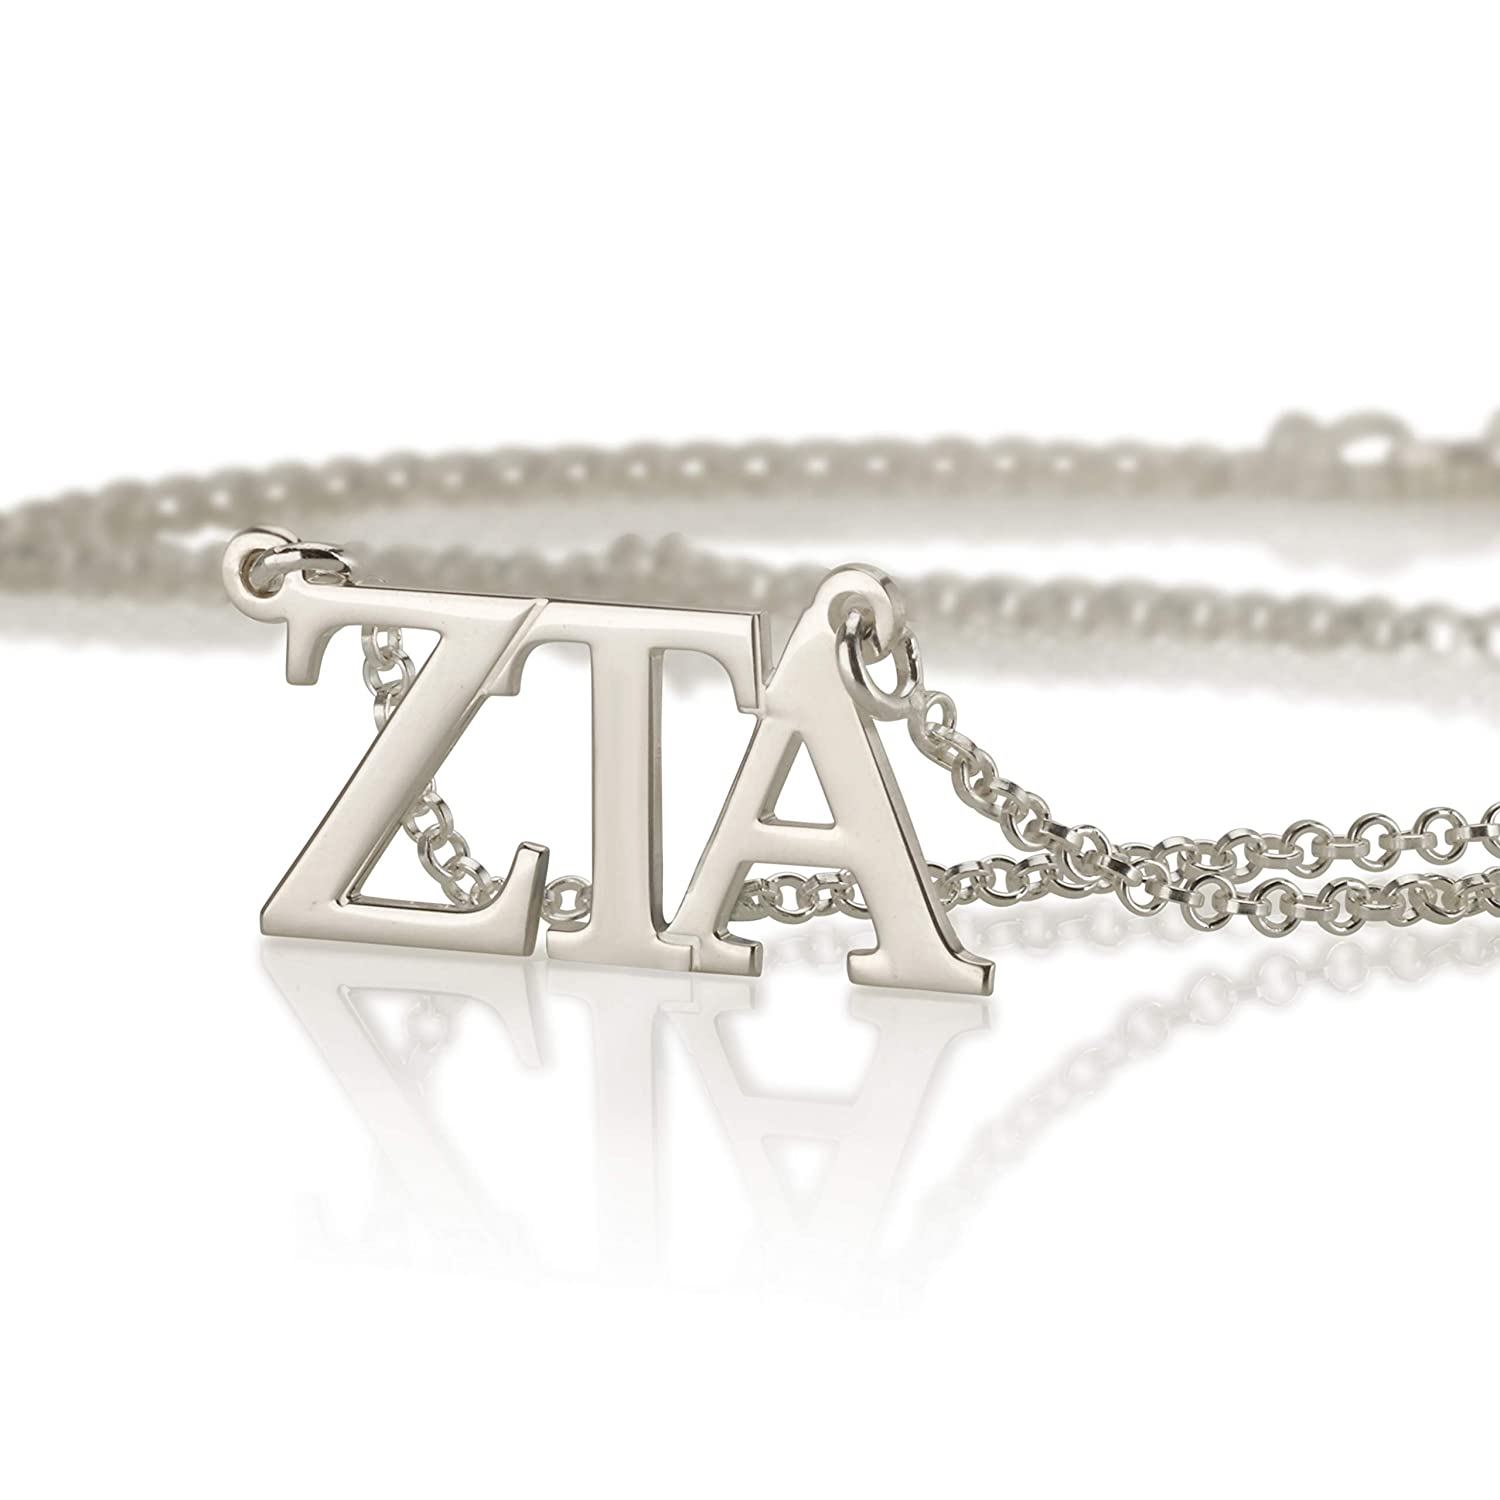 Sorority Gifts, Sorority Necklace, Personalized Necklace - Greek Initial Necklace fraternity Charm, 925 Sterling silver charm